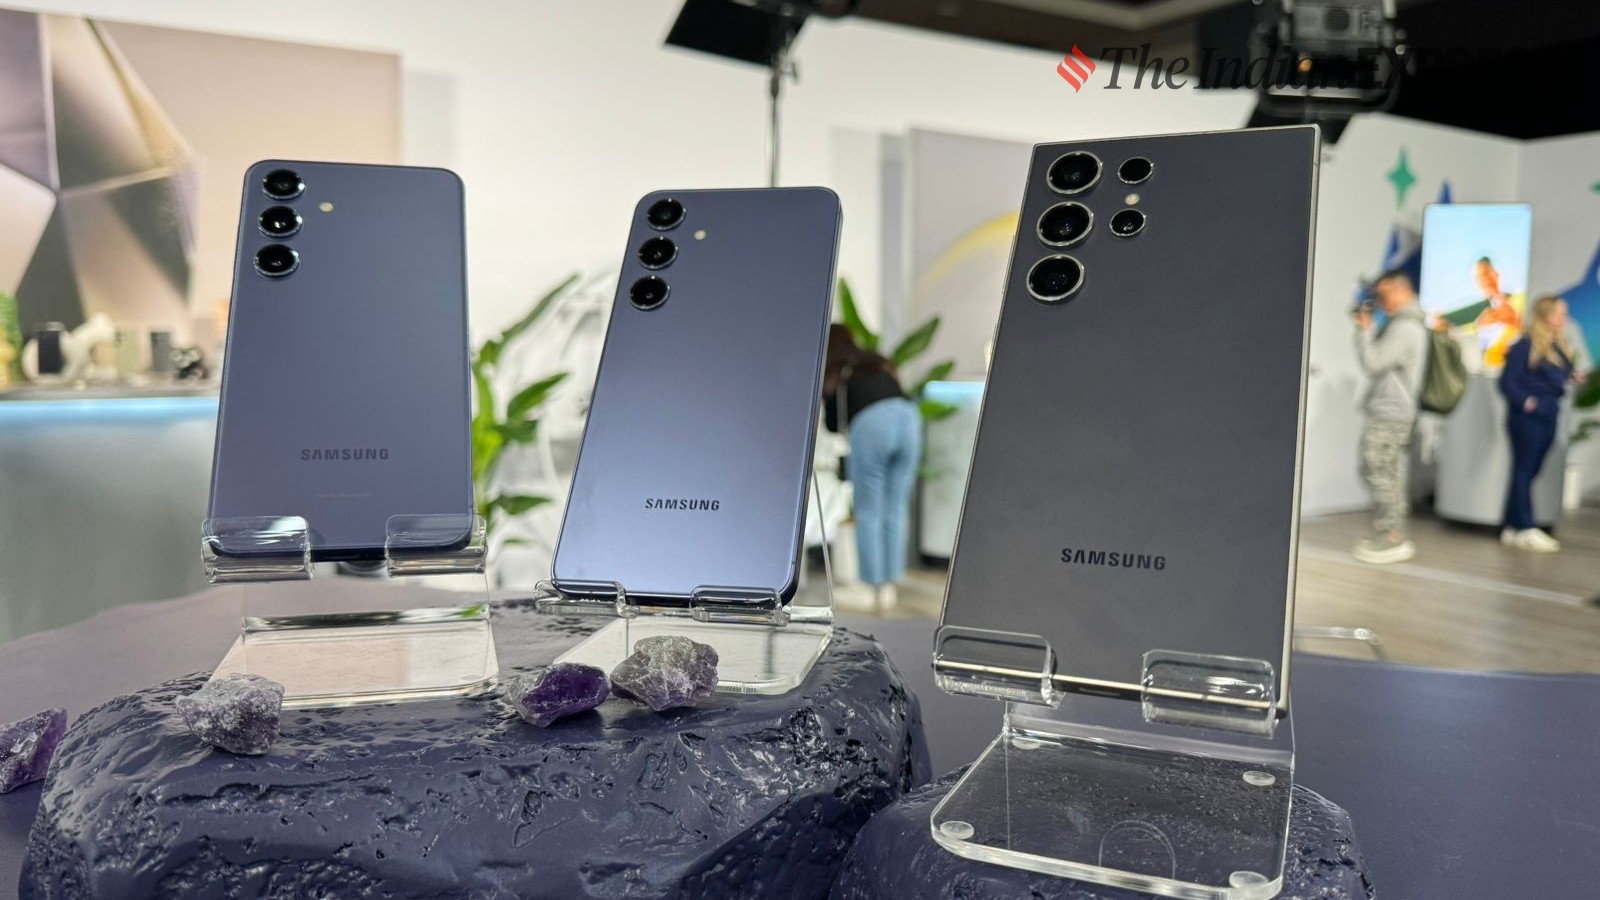 Galaxy AI: Here's what Samsung-Google's gen AI feature is capable